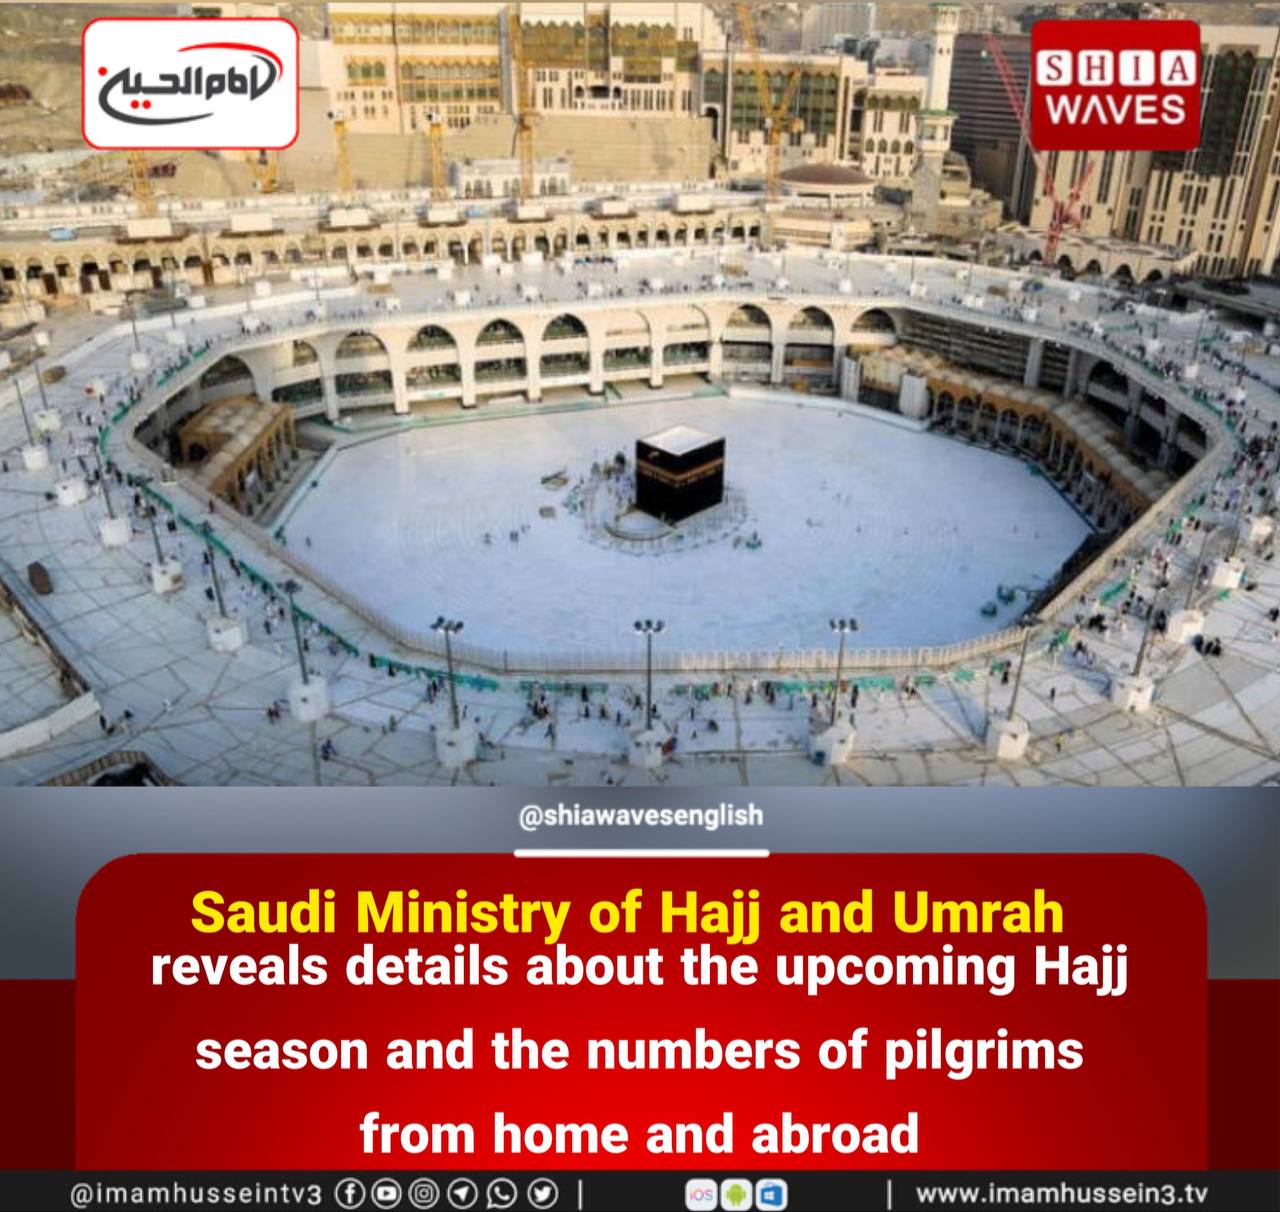 Saudi Ministry of Hajj and Umrah reveals details about the